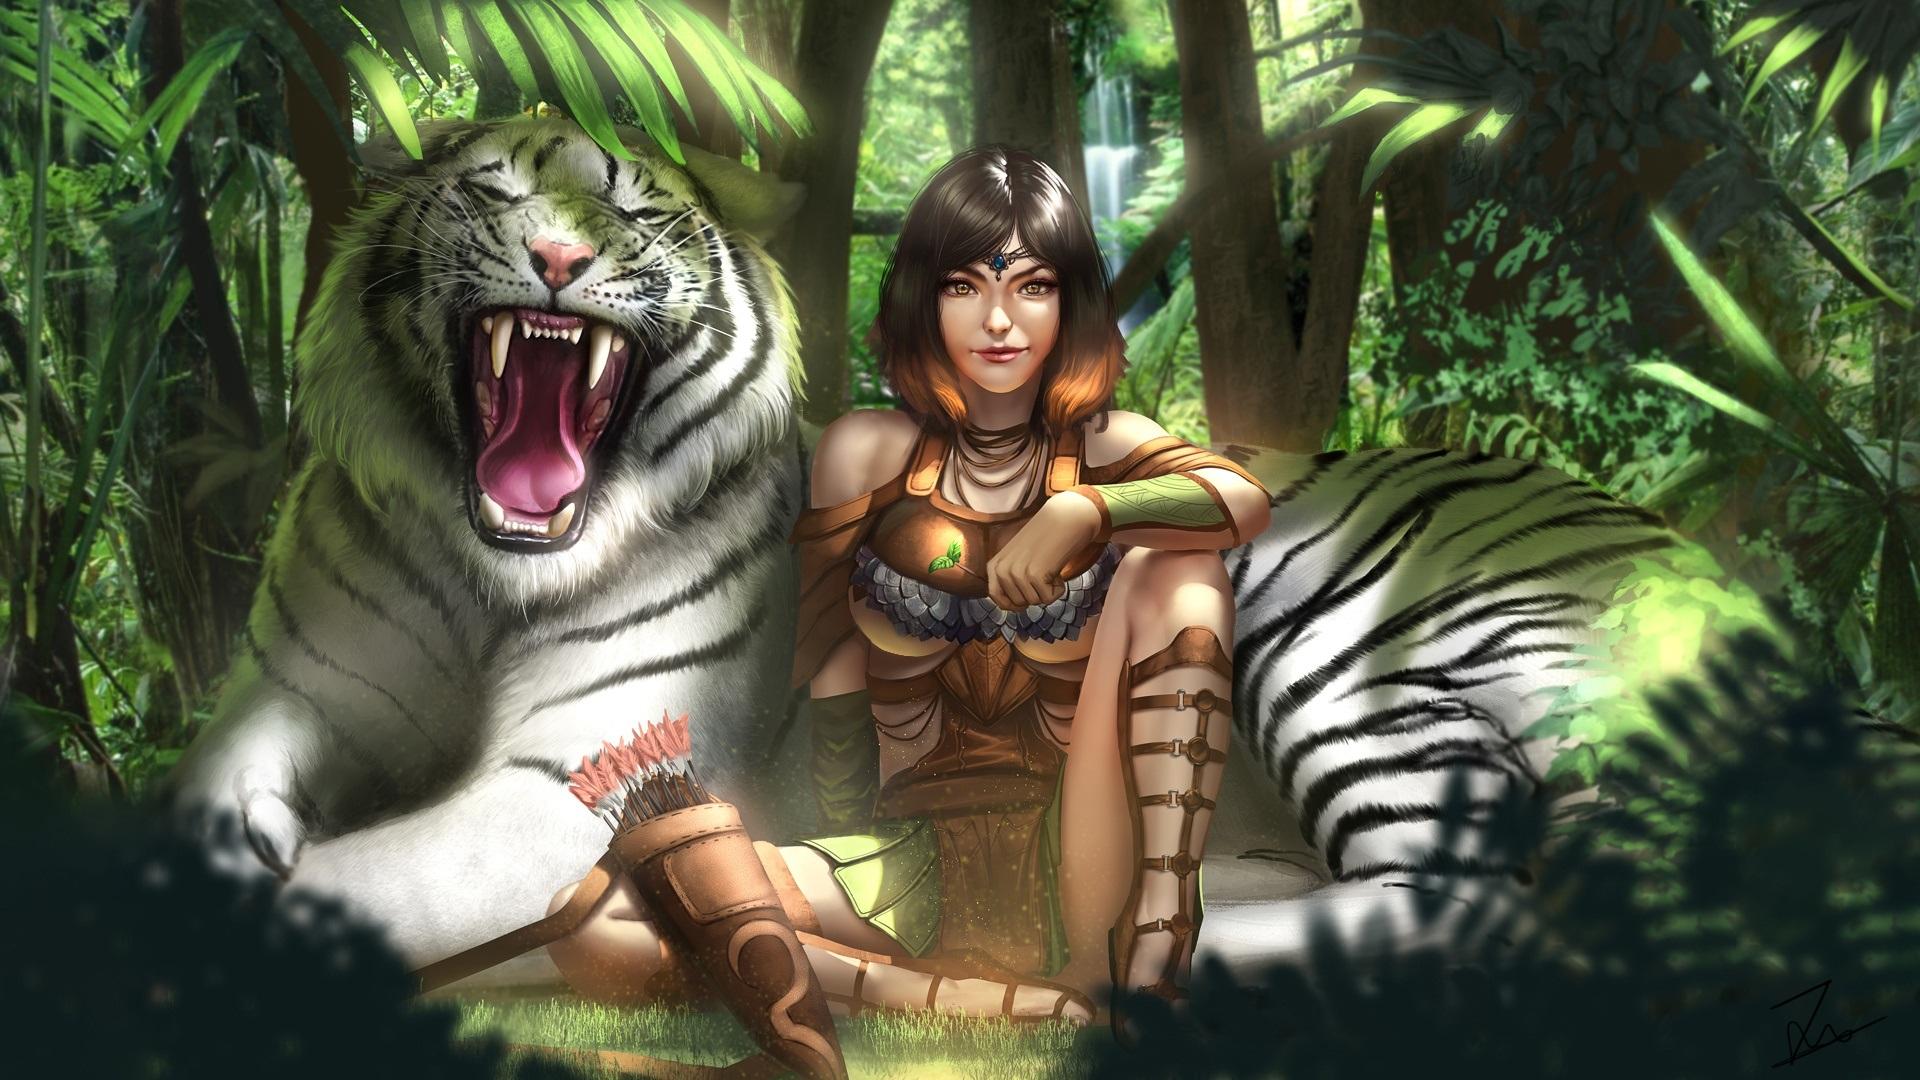 Wallpaper White tiger and girl, art drawing 1920x1080 Full HD 2K Picture, Image